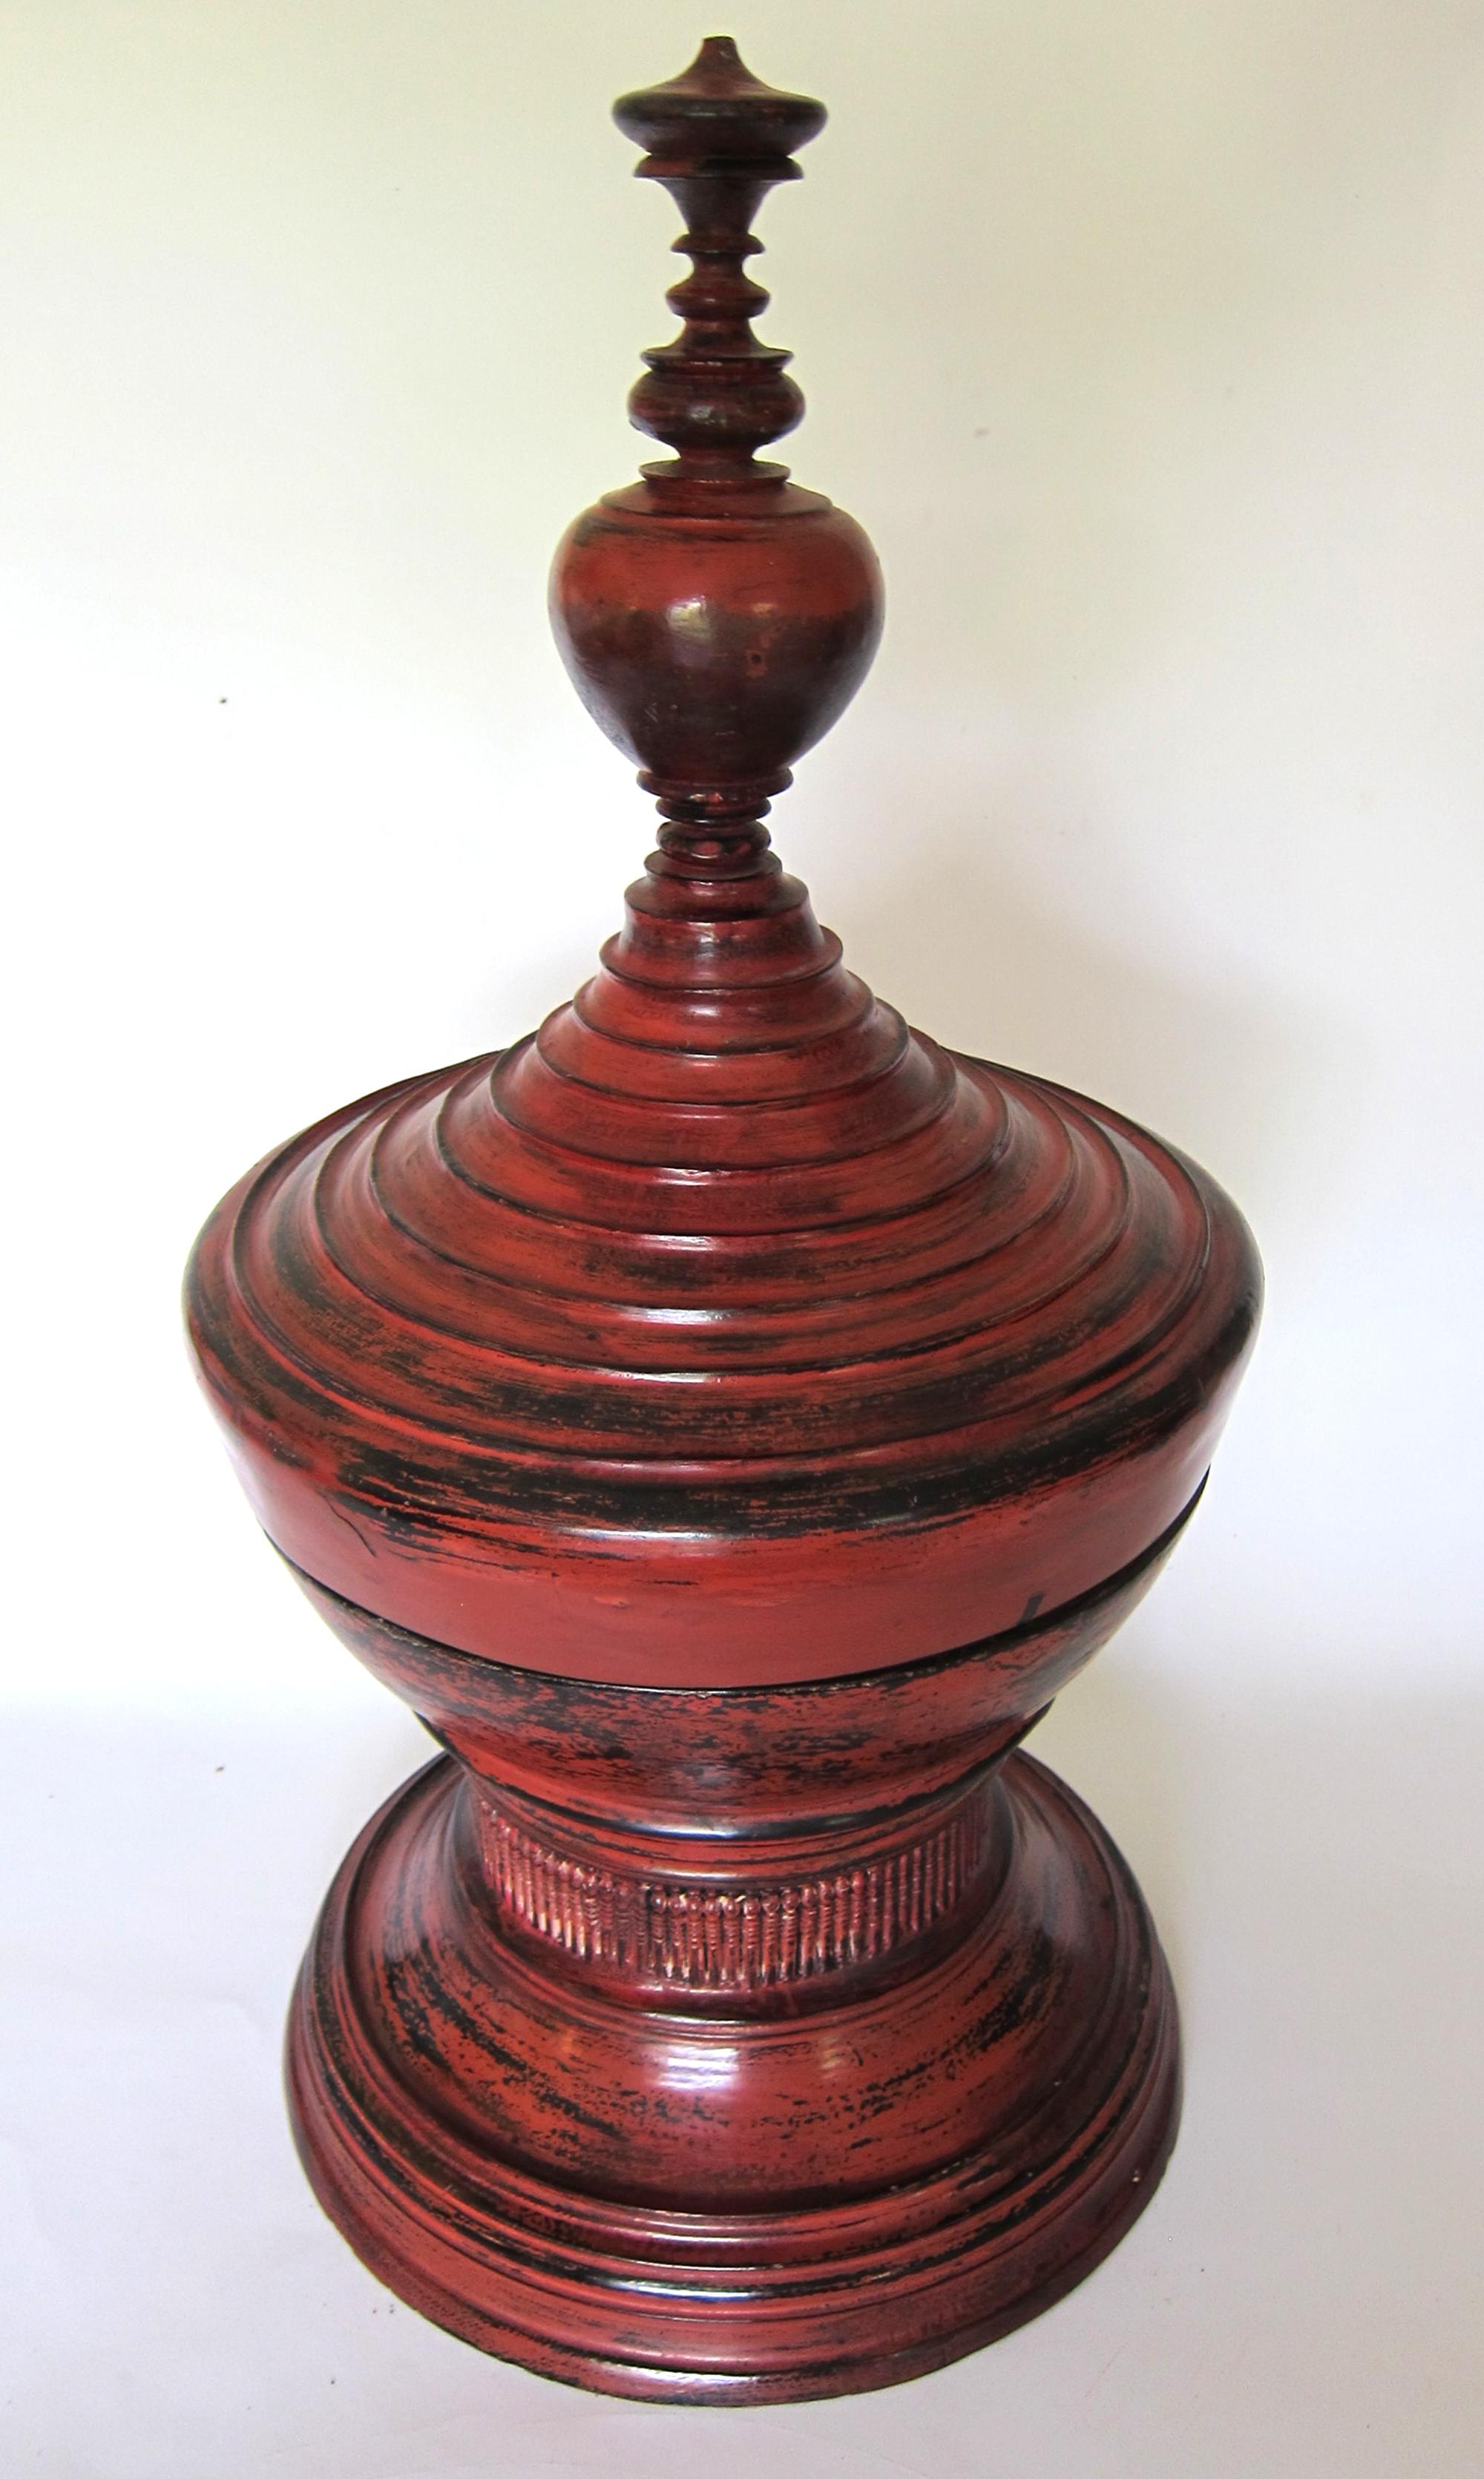 Burmese (Myanmar) lacquer ware has a long tradition dating back to the 13th century. Lacquer in Burma is called “Thitsi” meaning the sap of a Thitsi Tree (Melanhorrea Usitata). Typically, bamboo and wood are used as a frame or base in making lacquer